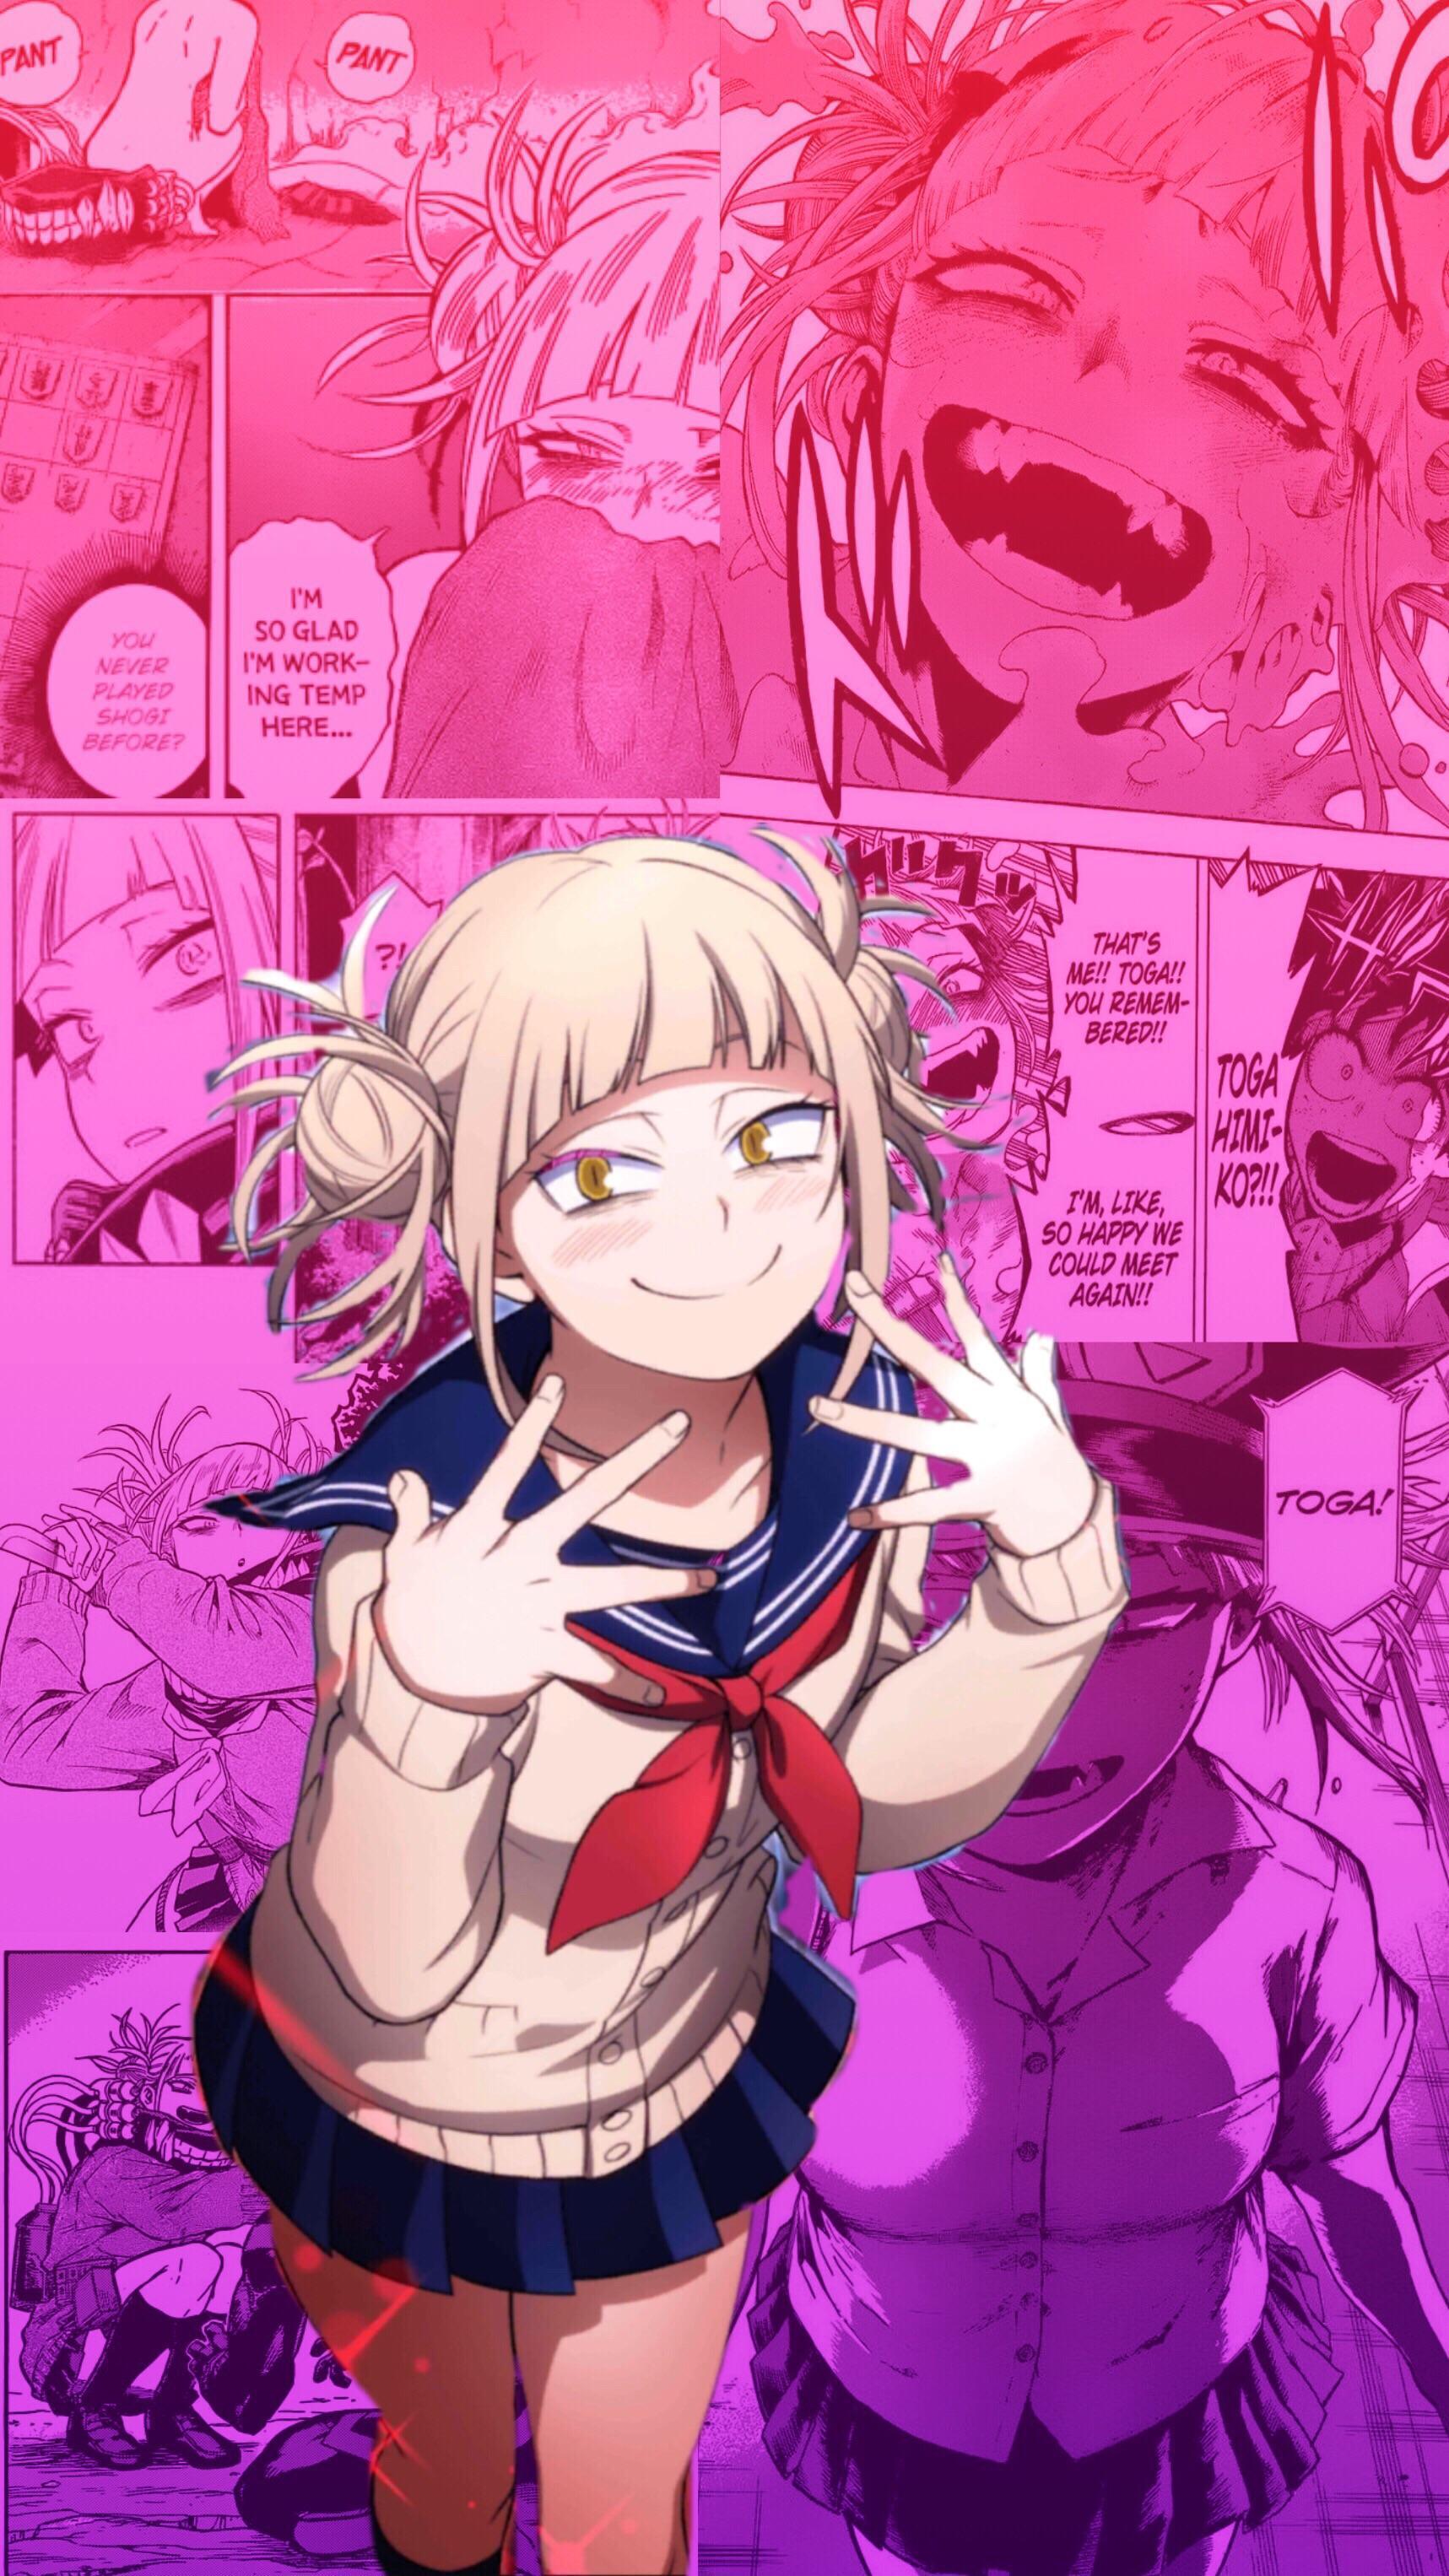 39 Toga Himiko Wallpapers for iPhone and Android by Andrew Harmon